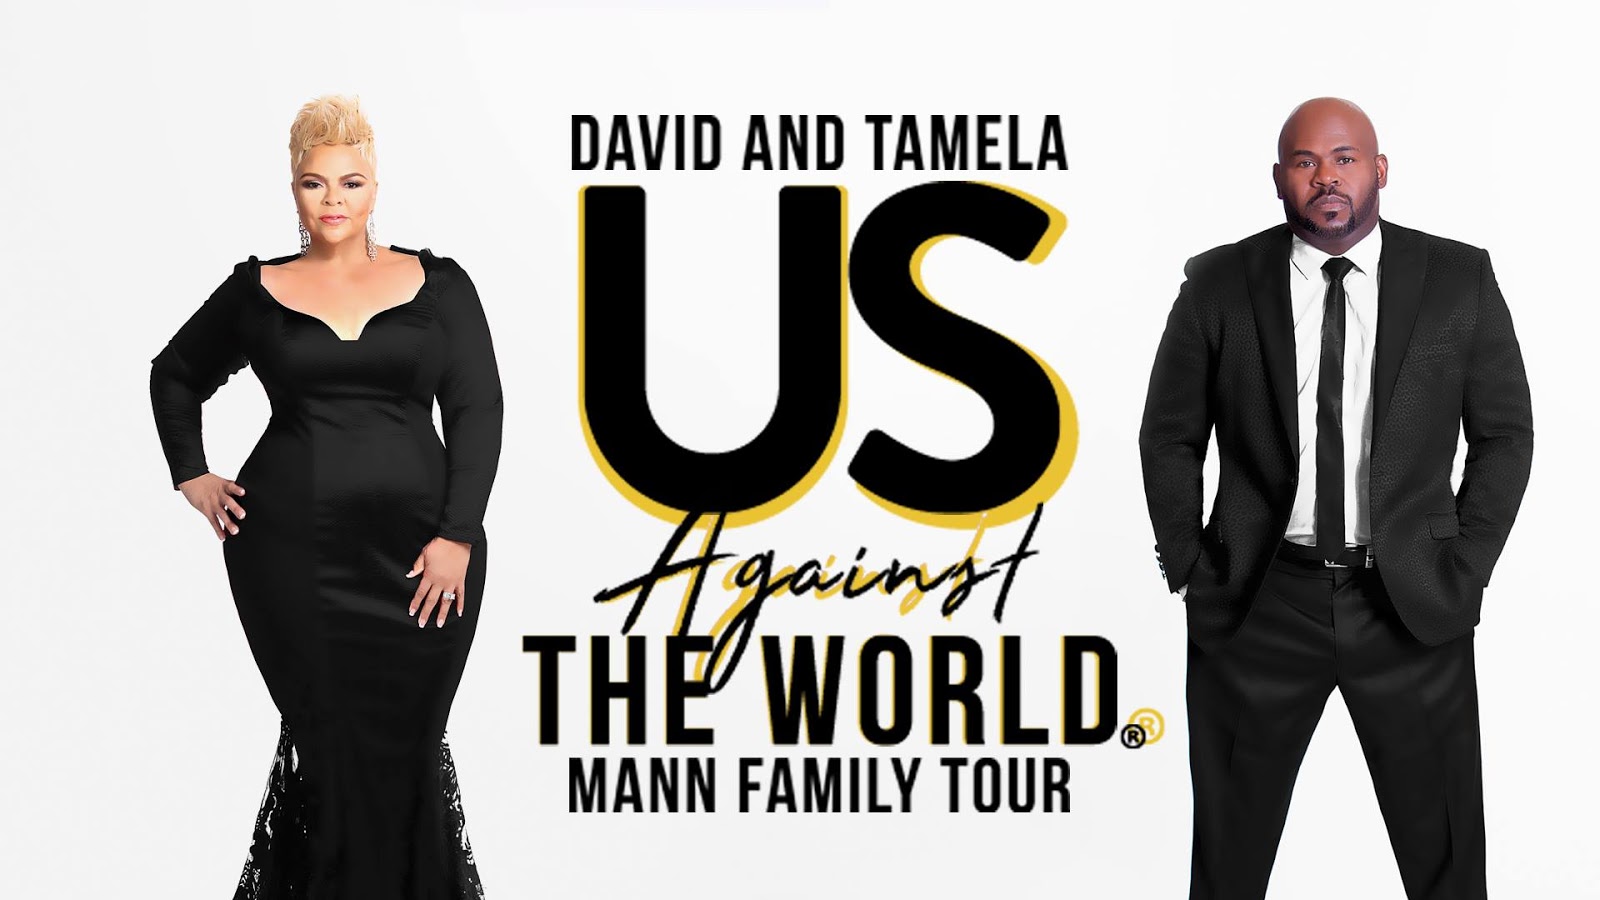 Tamela Mann Talks Getting Fit With Her Husband David's Support